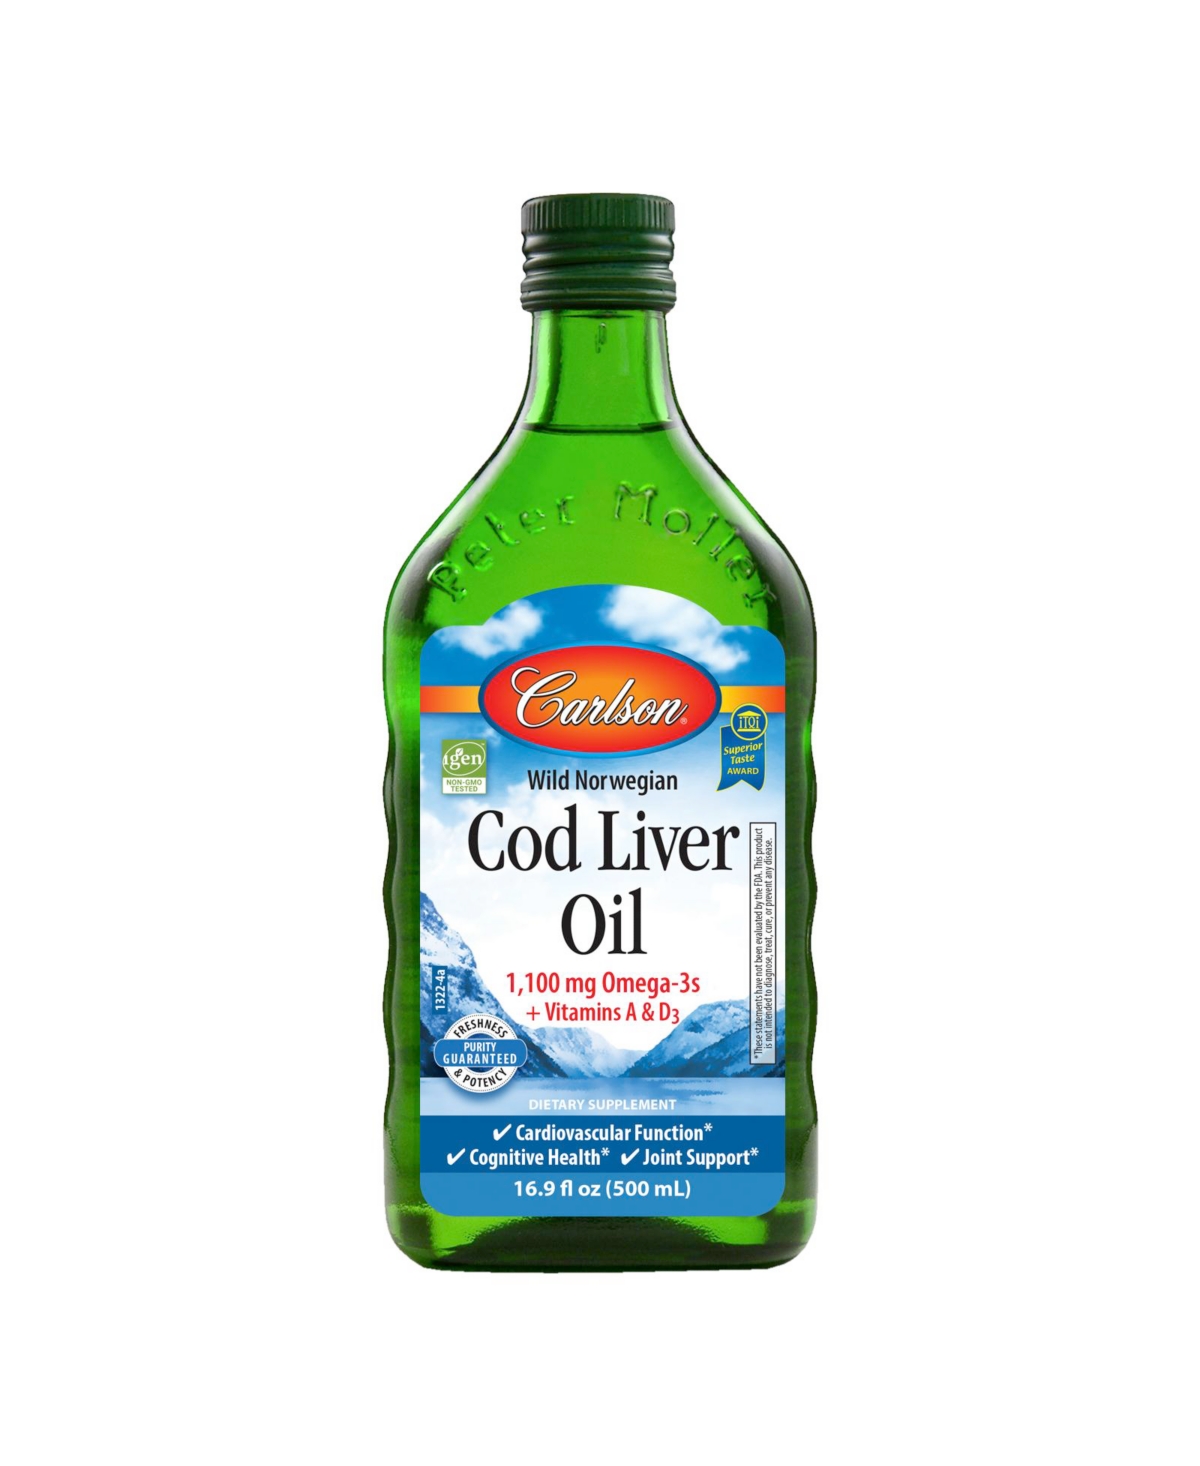 Carlson - Cod Liver Oil, 1100 mg Omega-3s + A & D3, Norwegian, Wild Caught, Sustainably Sourced, Unflavored, 500 mL (16.9 Fl Oz)